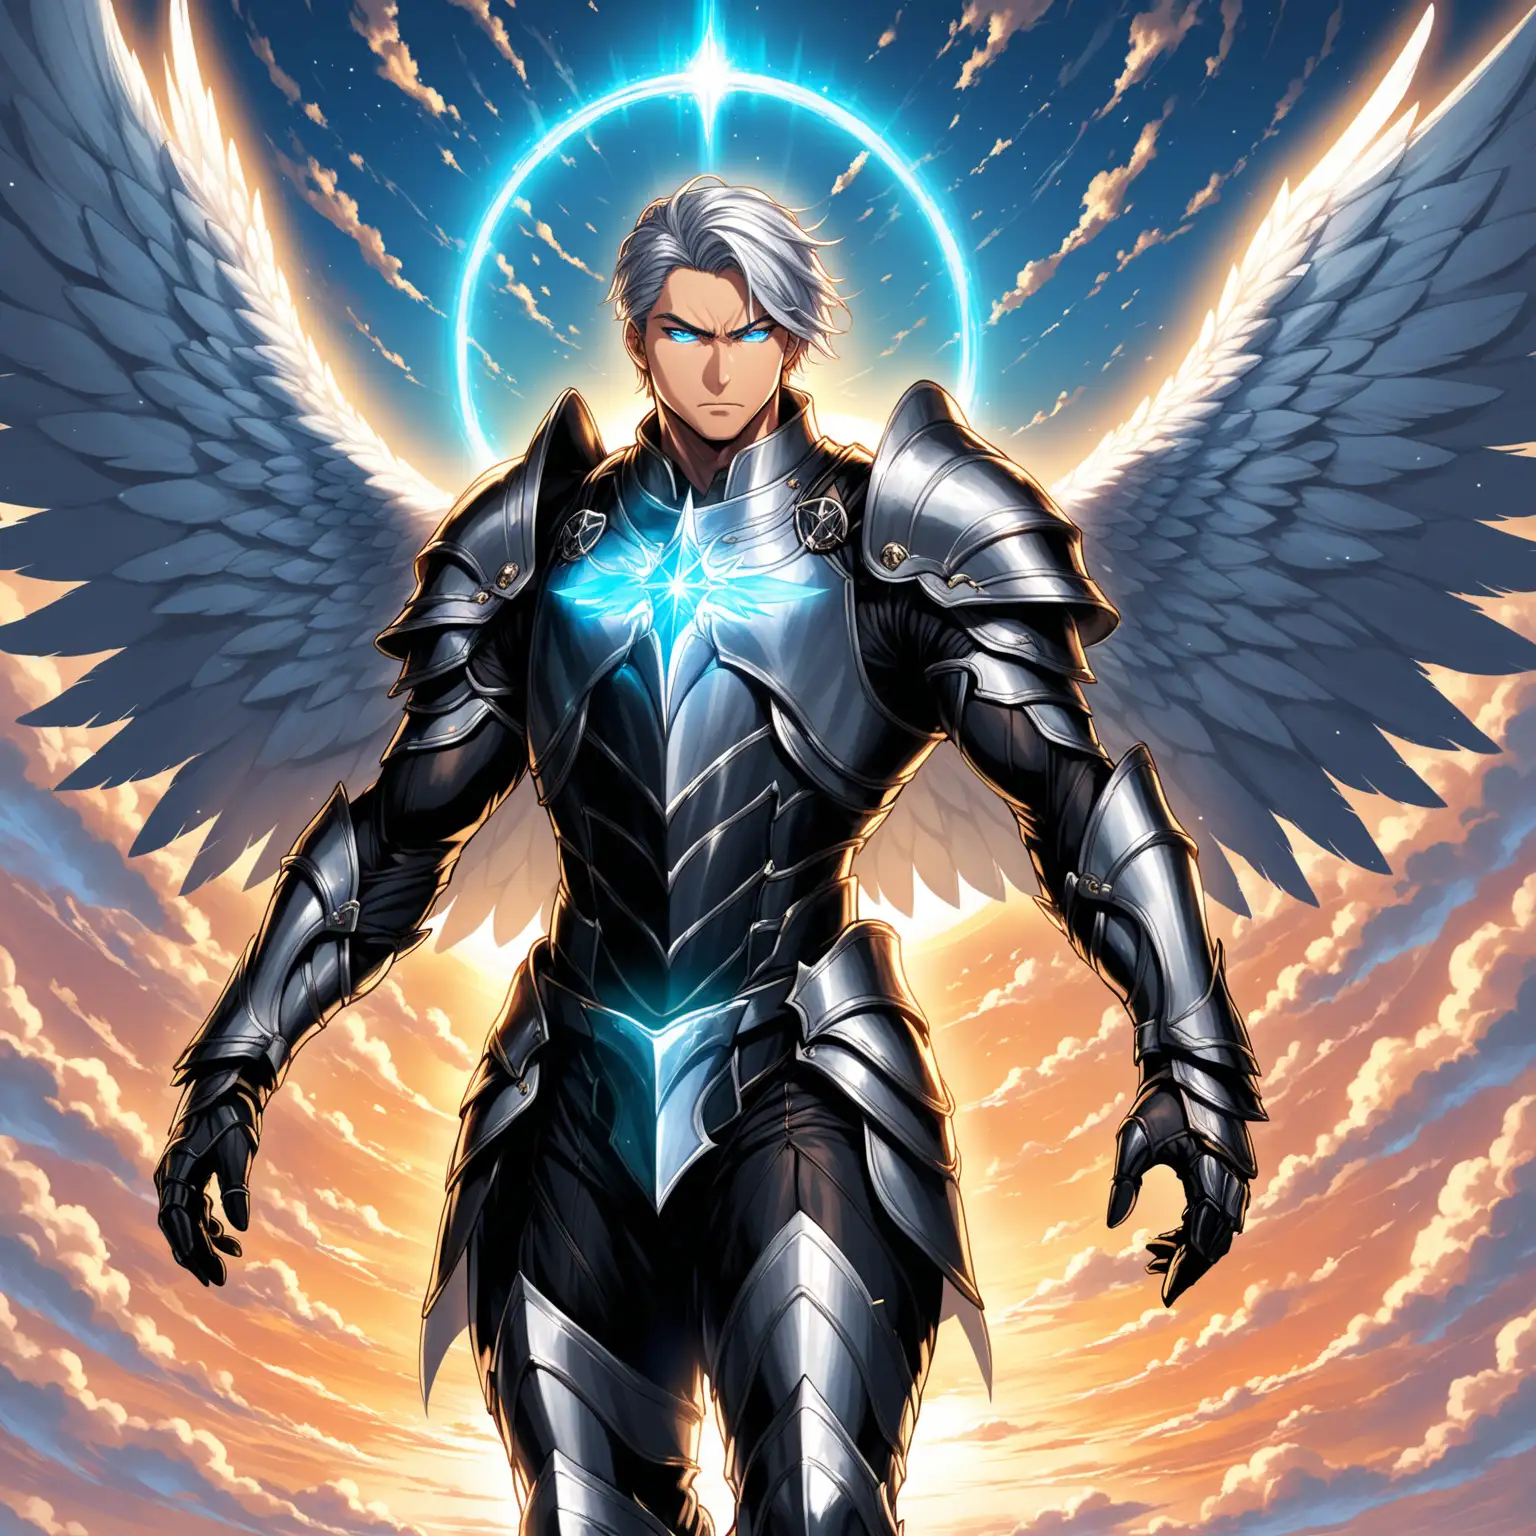 1 man. He is the god of Dusk and a paladin. He is an angel with huge wings and a halo of silver light. He is handsome and muscular. He has undercut silver hair and light blue bright glowing eyes. He has a silver aura around him. He is wearing black knight armor with silver trim. He is flying in the sky and it's sundown. He is not wearing a helmet. He has an enraged expression. He is about to attack.